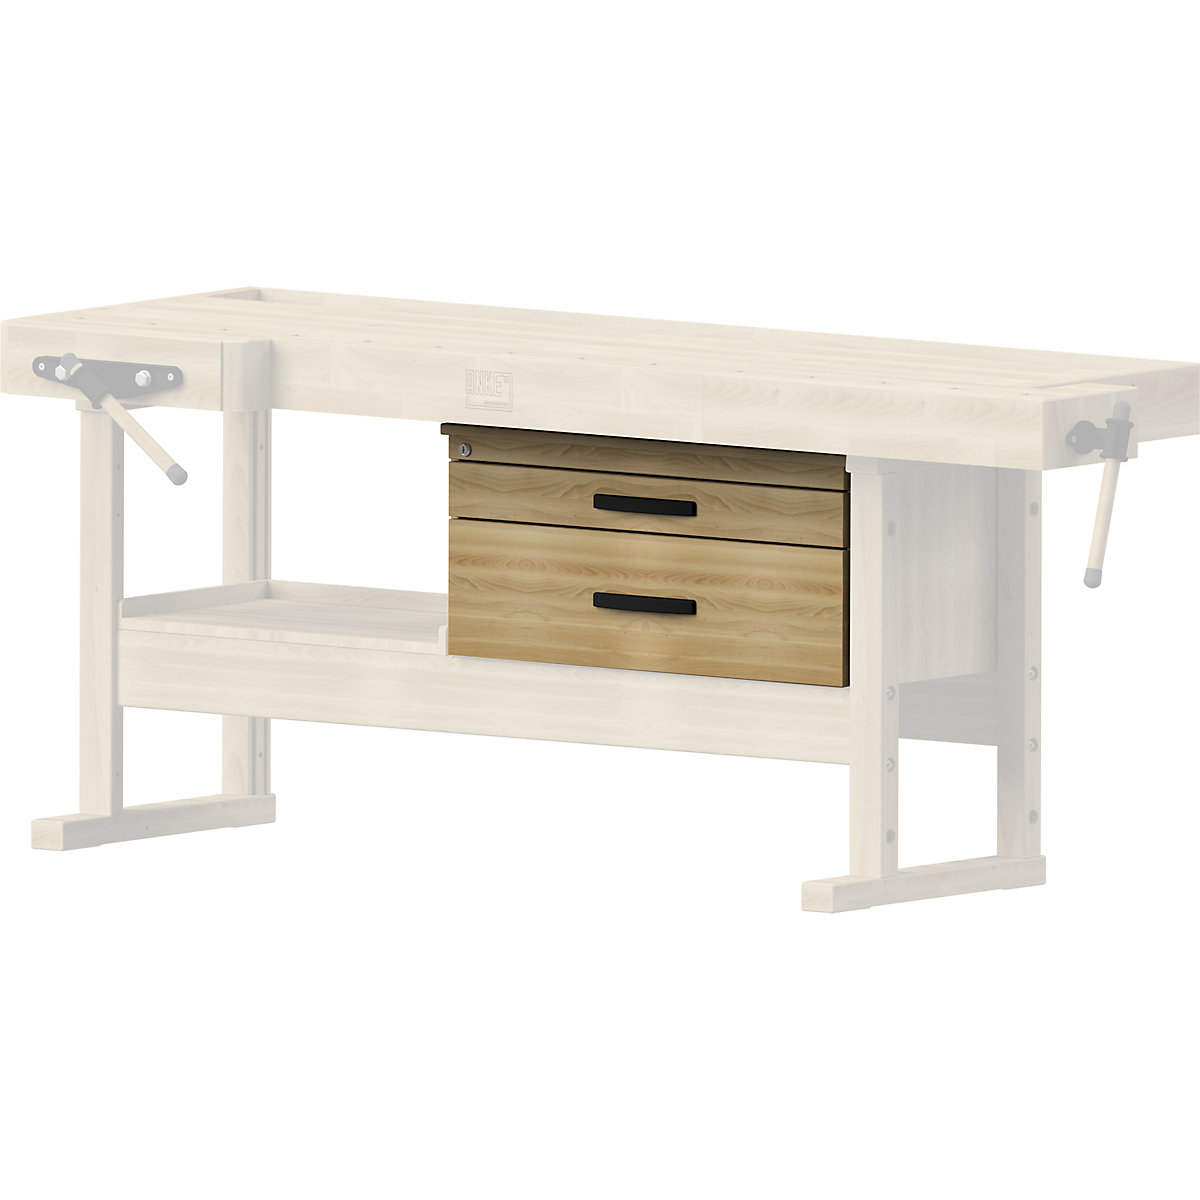 Add-on drawer unit for carpenters' planing bench - ANKE